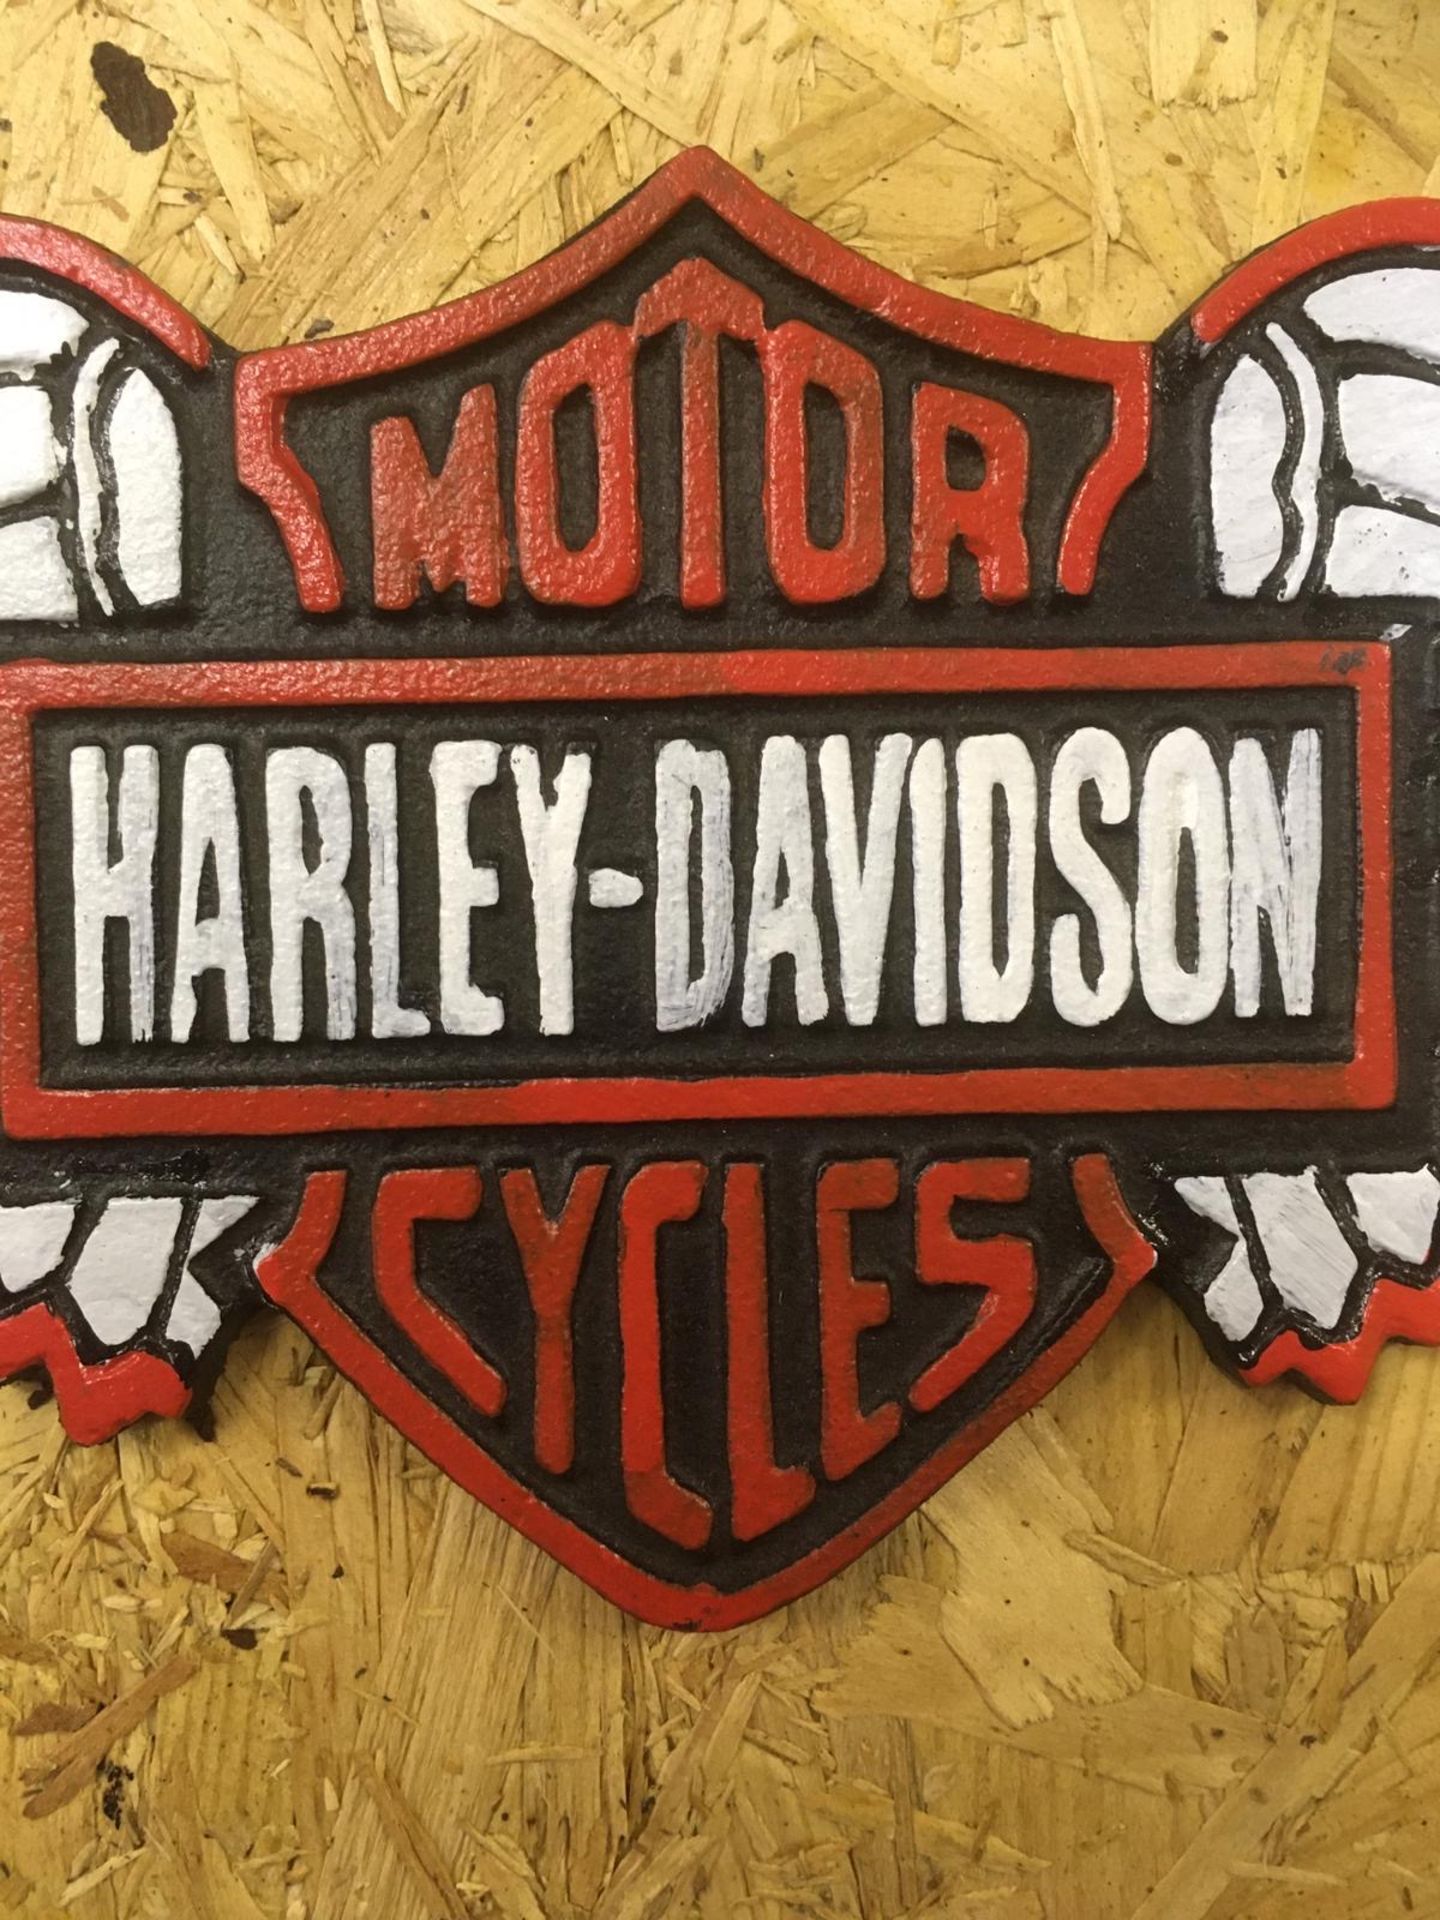 Harley Davidson Motorcycle Wall Plaque - Image 2 of 2